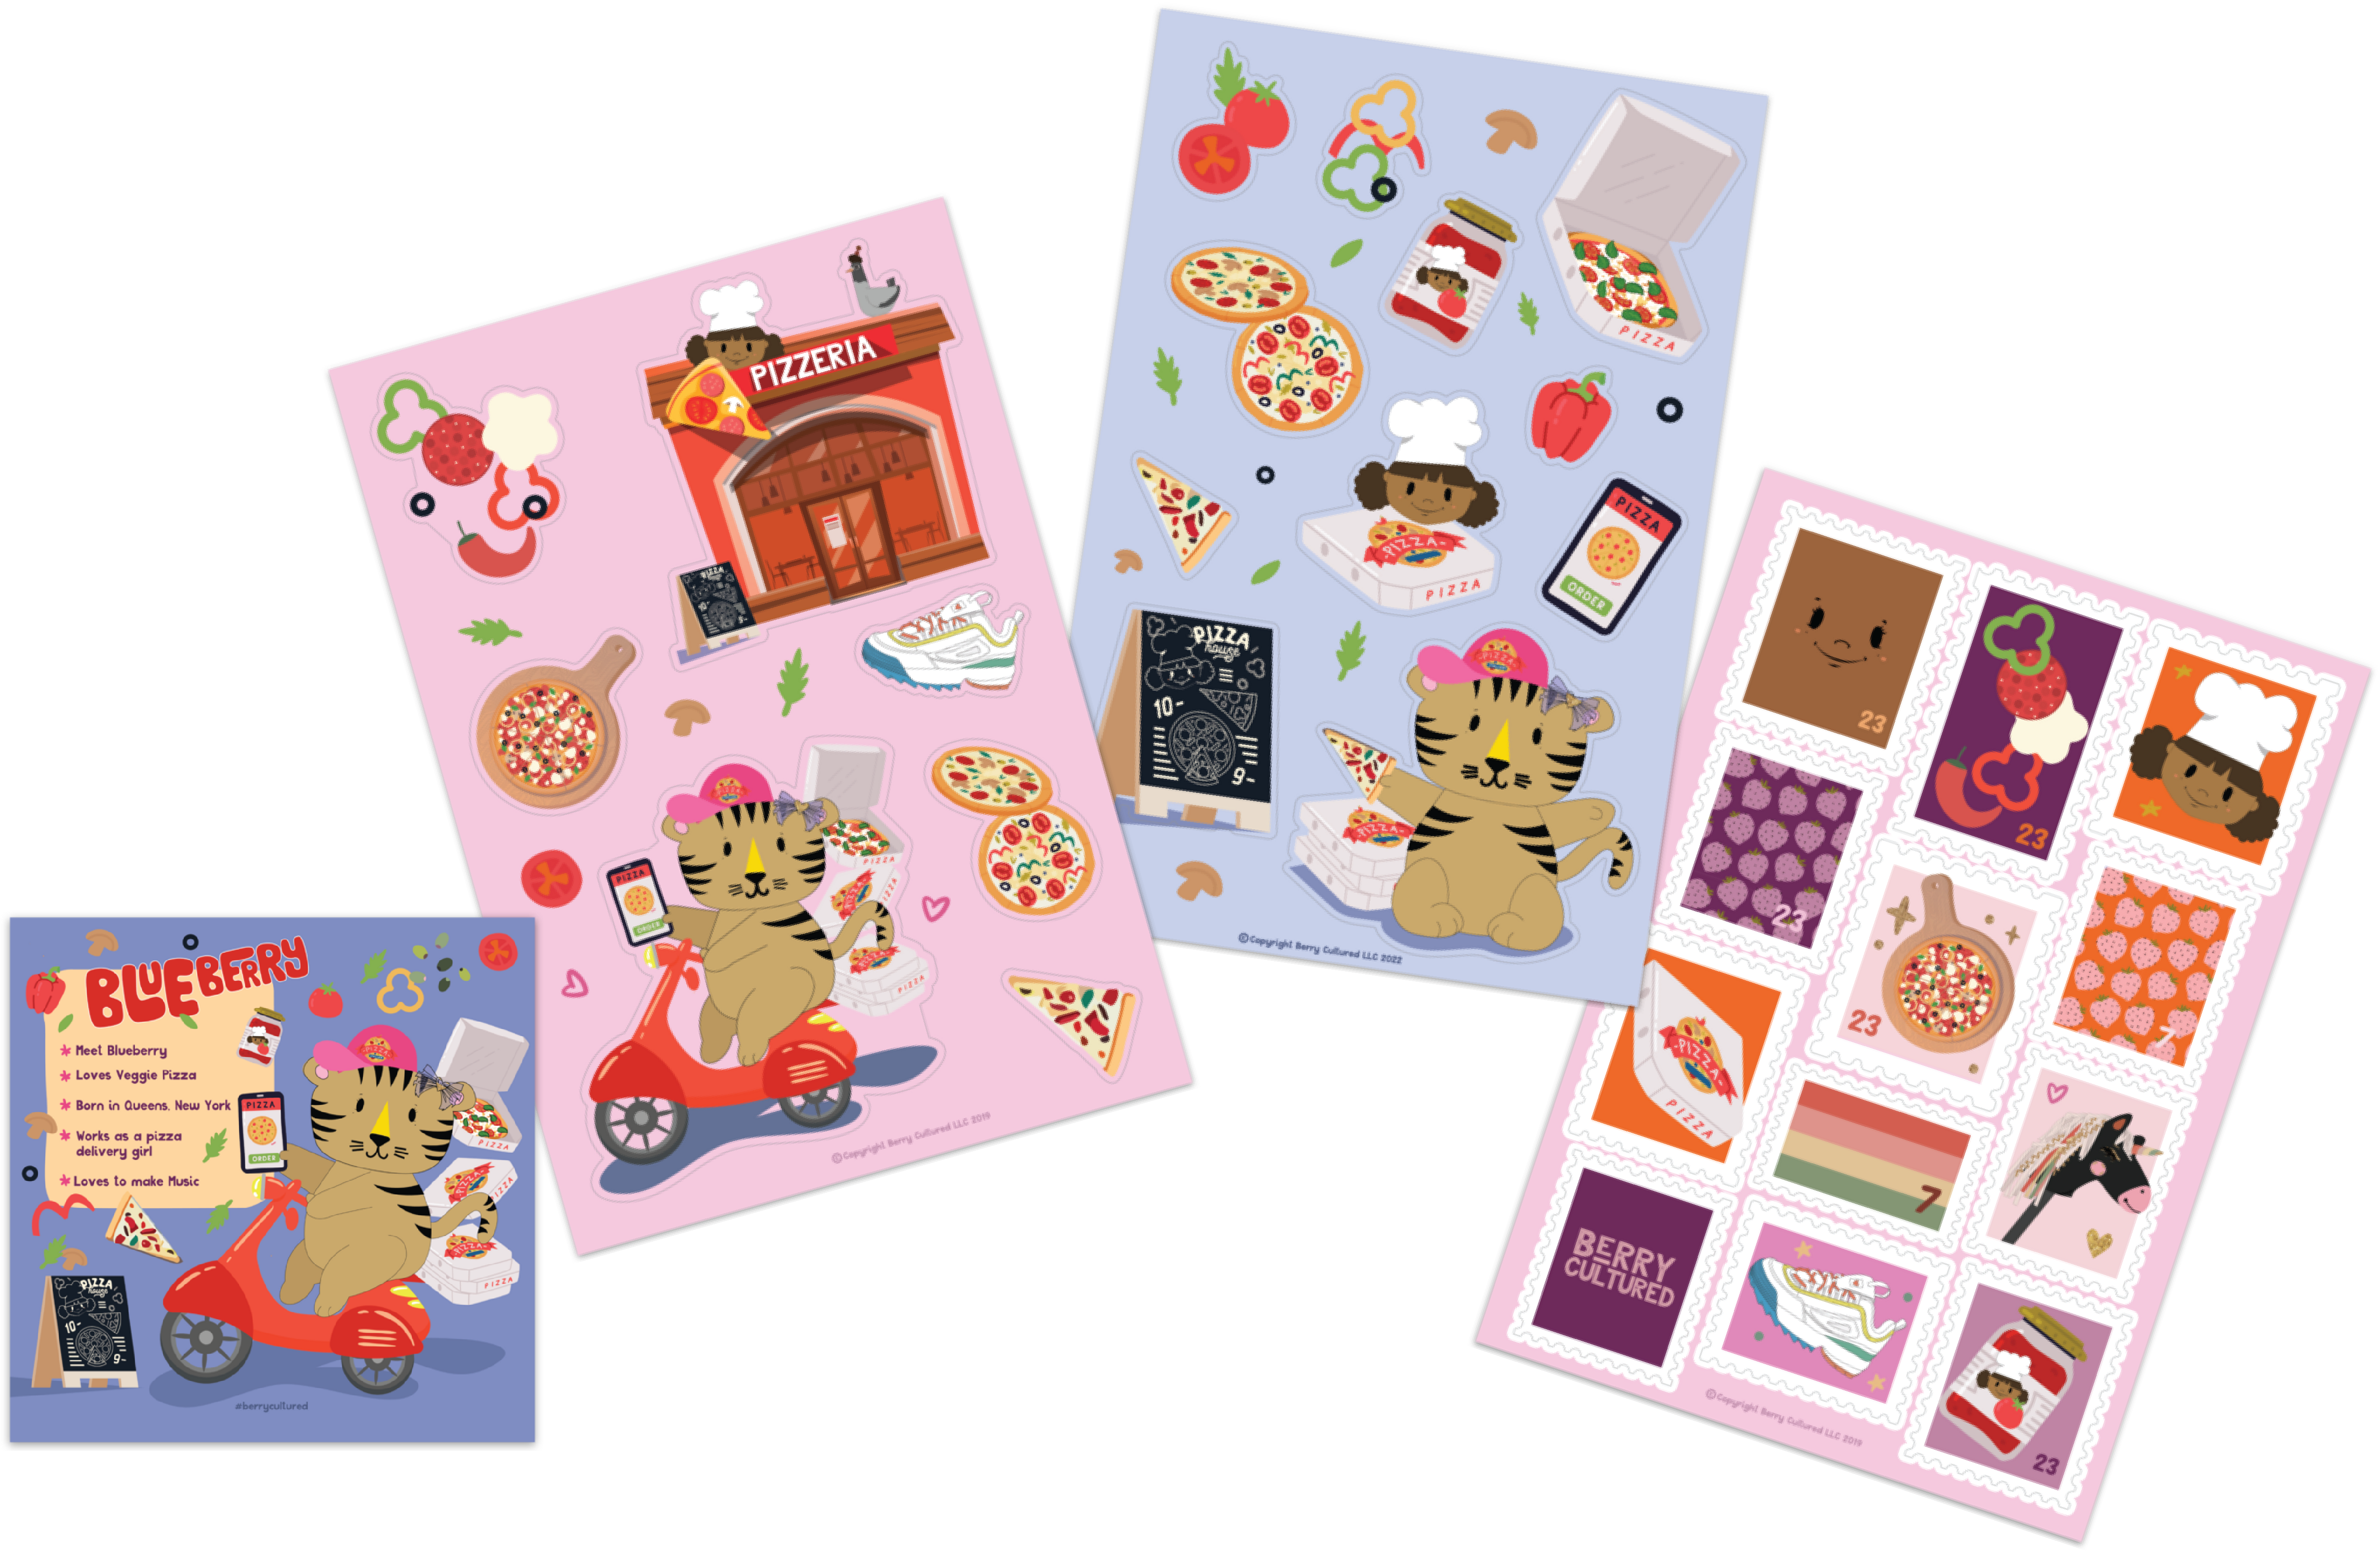 Blueberry Sticker Pack (Set of 3 sheets)